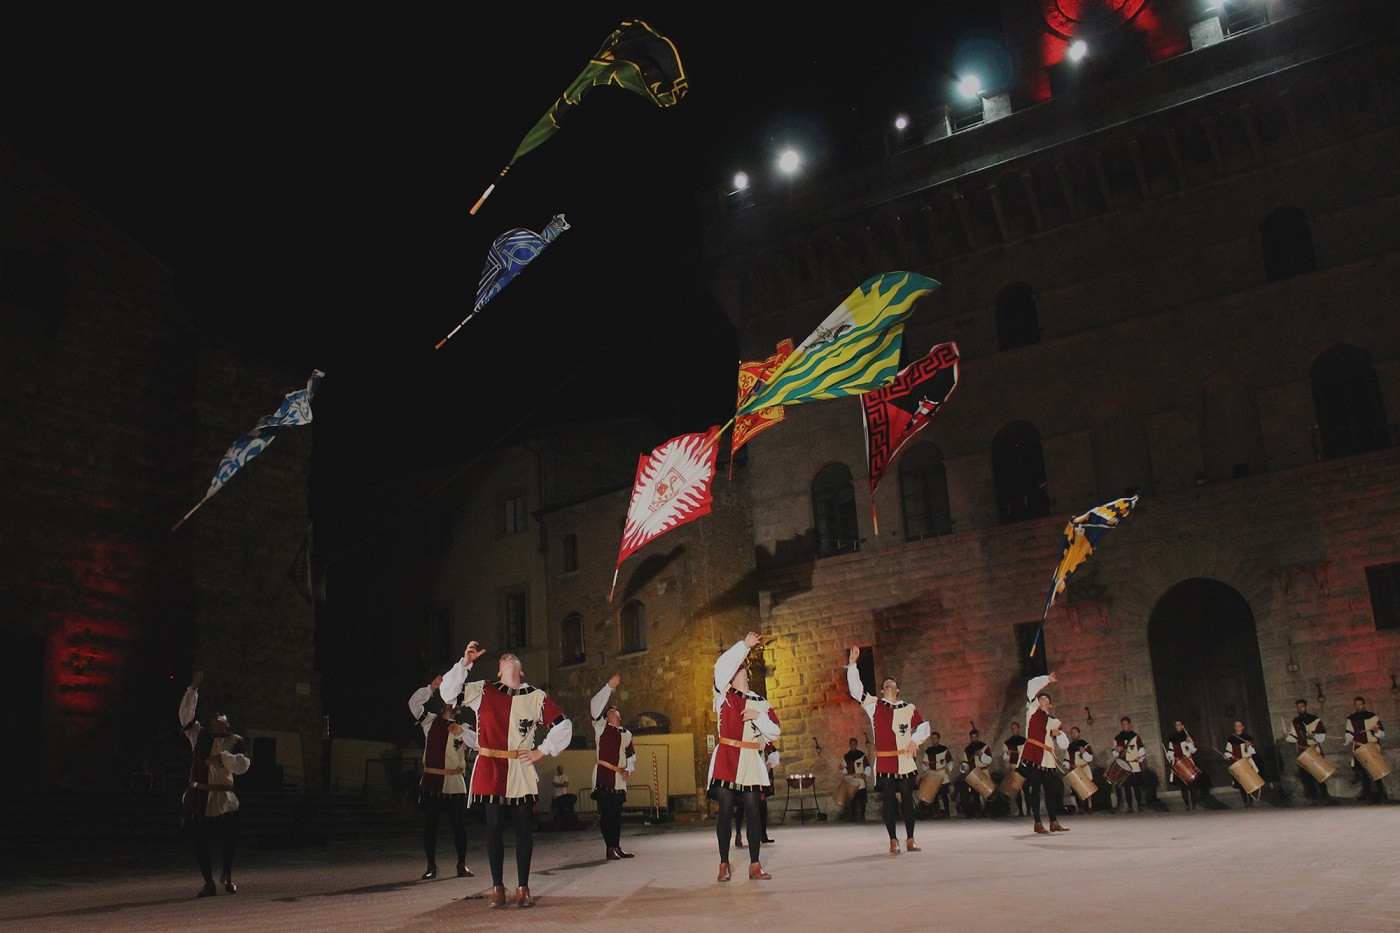 The most awaited event in Montepulciano: the Bravìo delle Botti